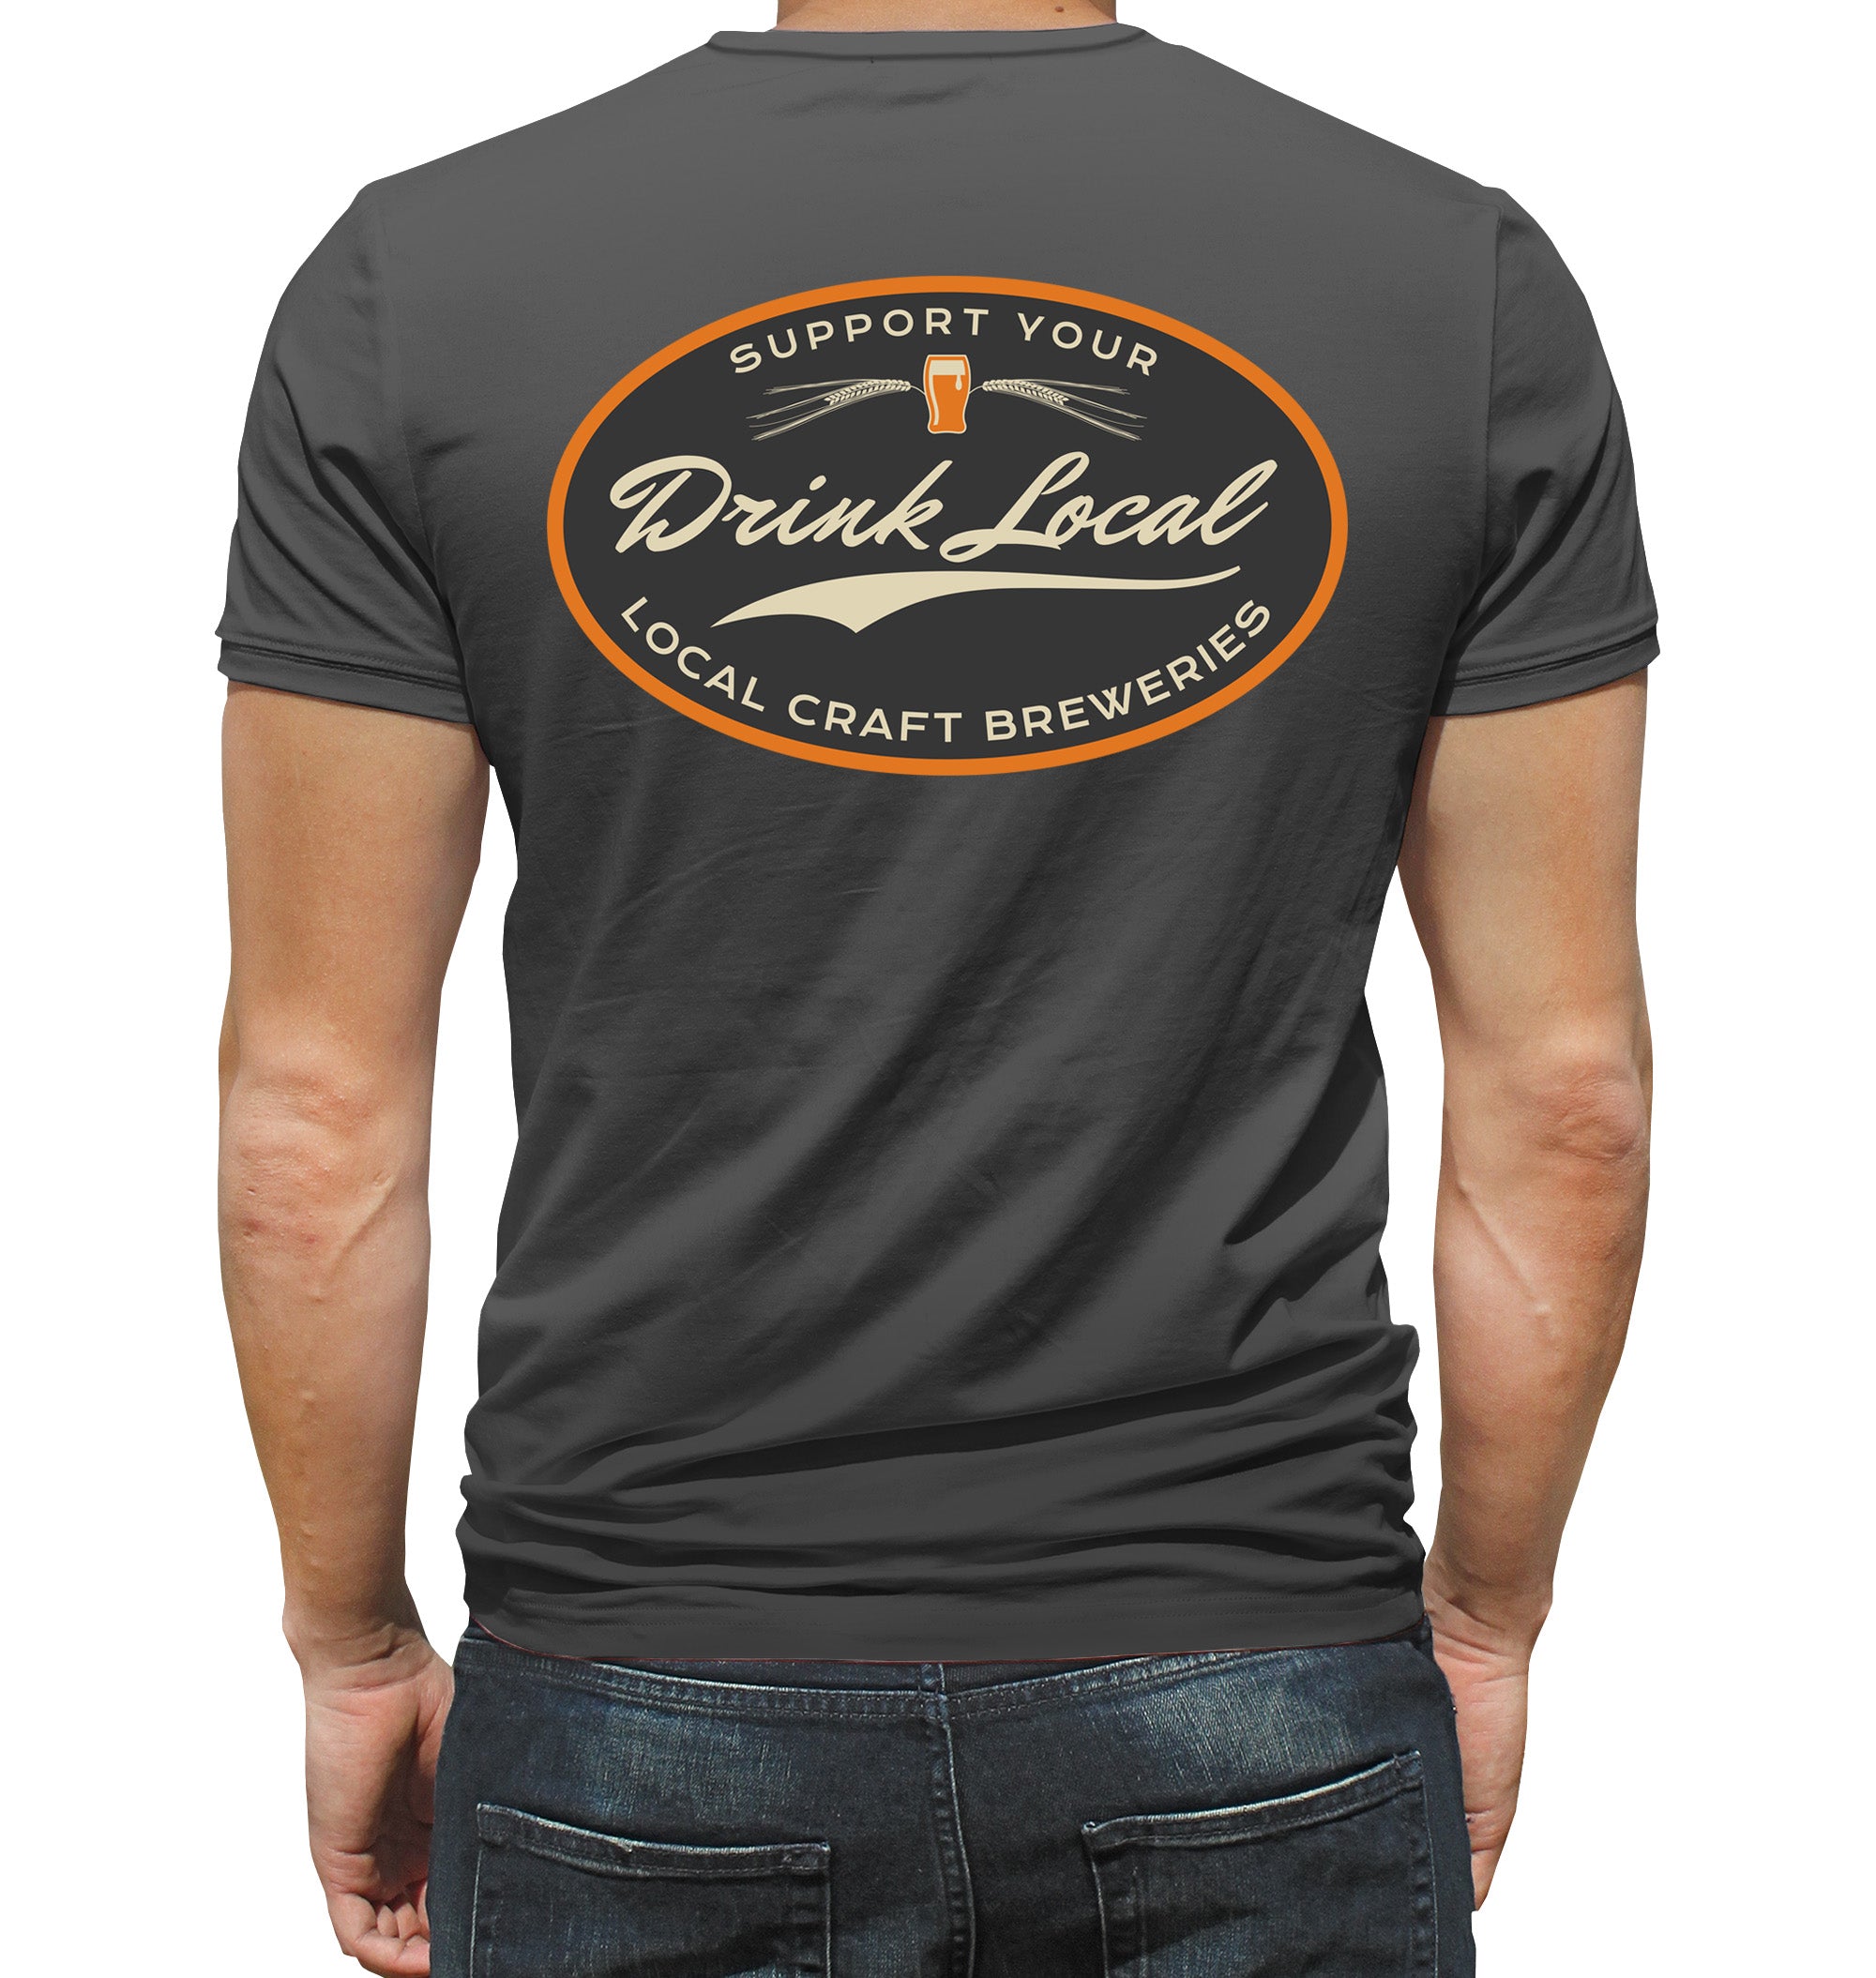 Drink Local Craft Beer Grey T-Shirt On Model